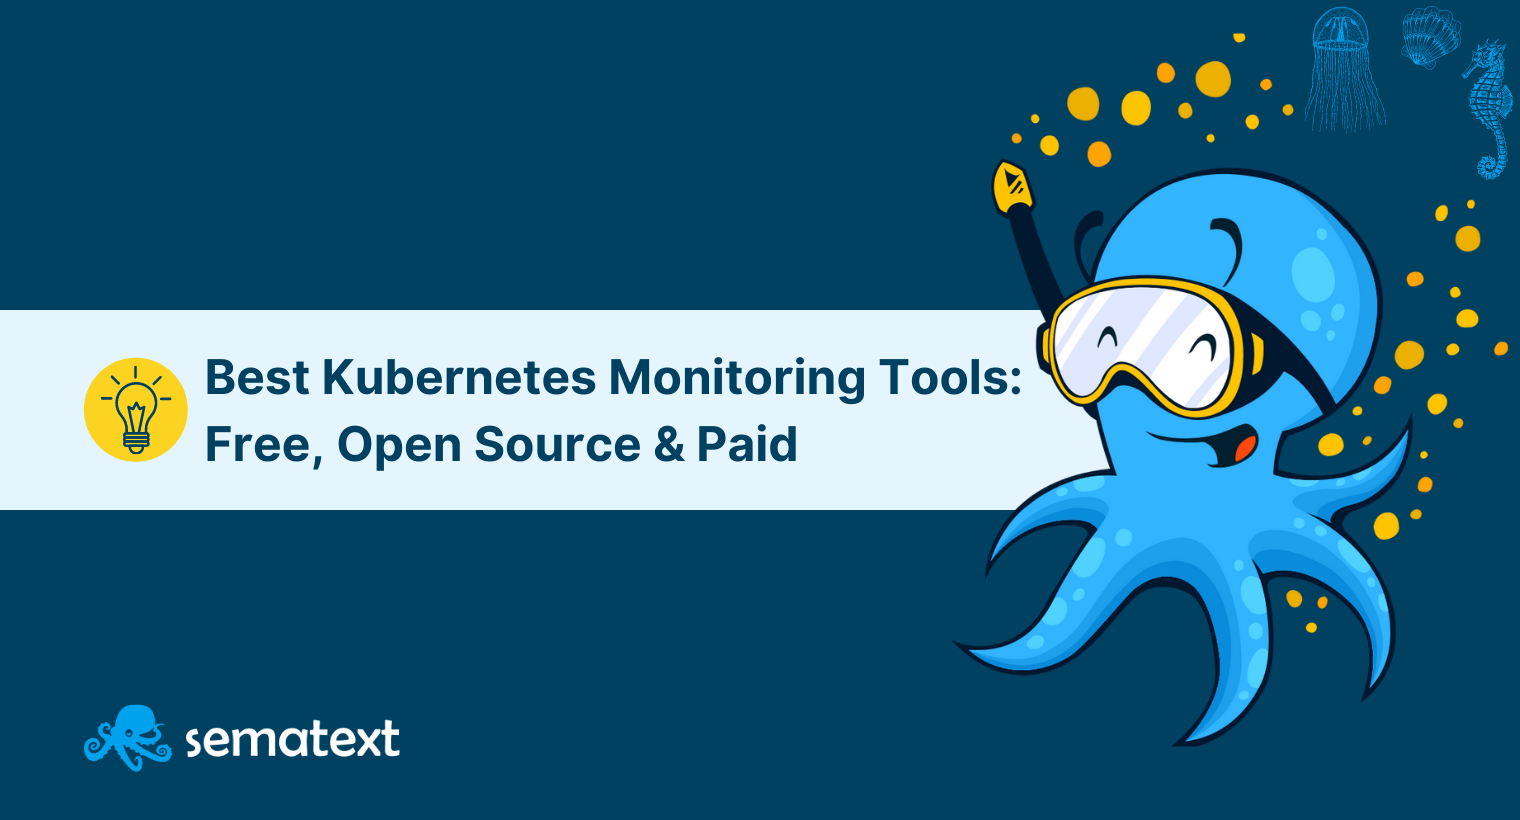 13+ Best Kubernetes Monitoring Tools: Free, Open Source & Paid [2023 Comparison]